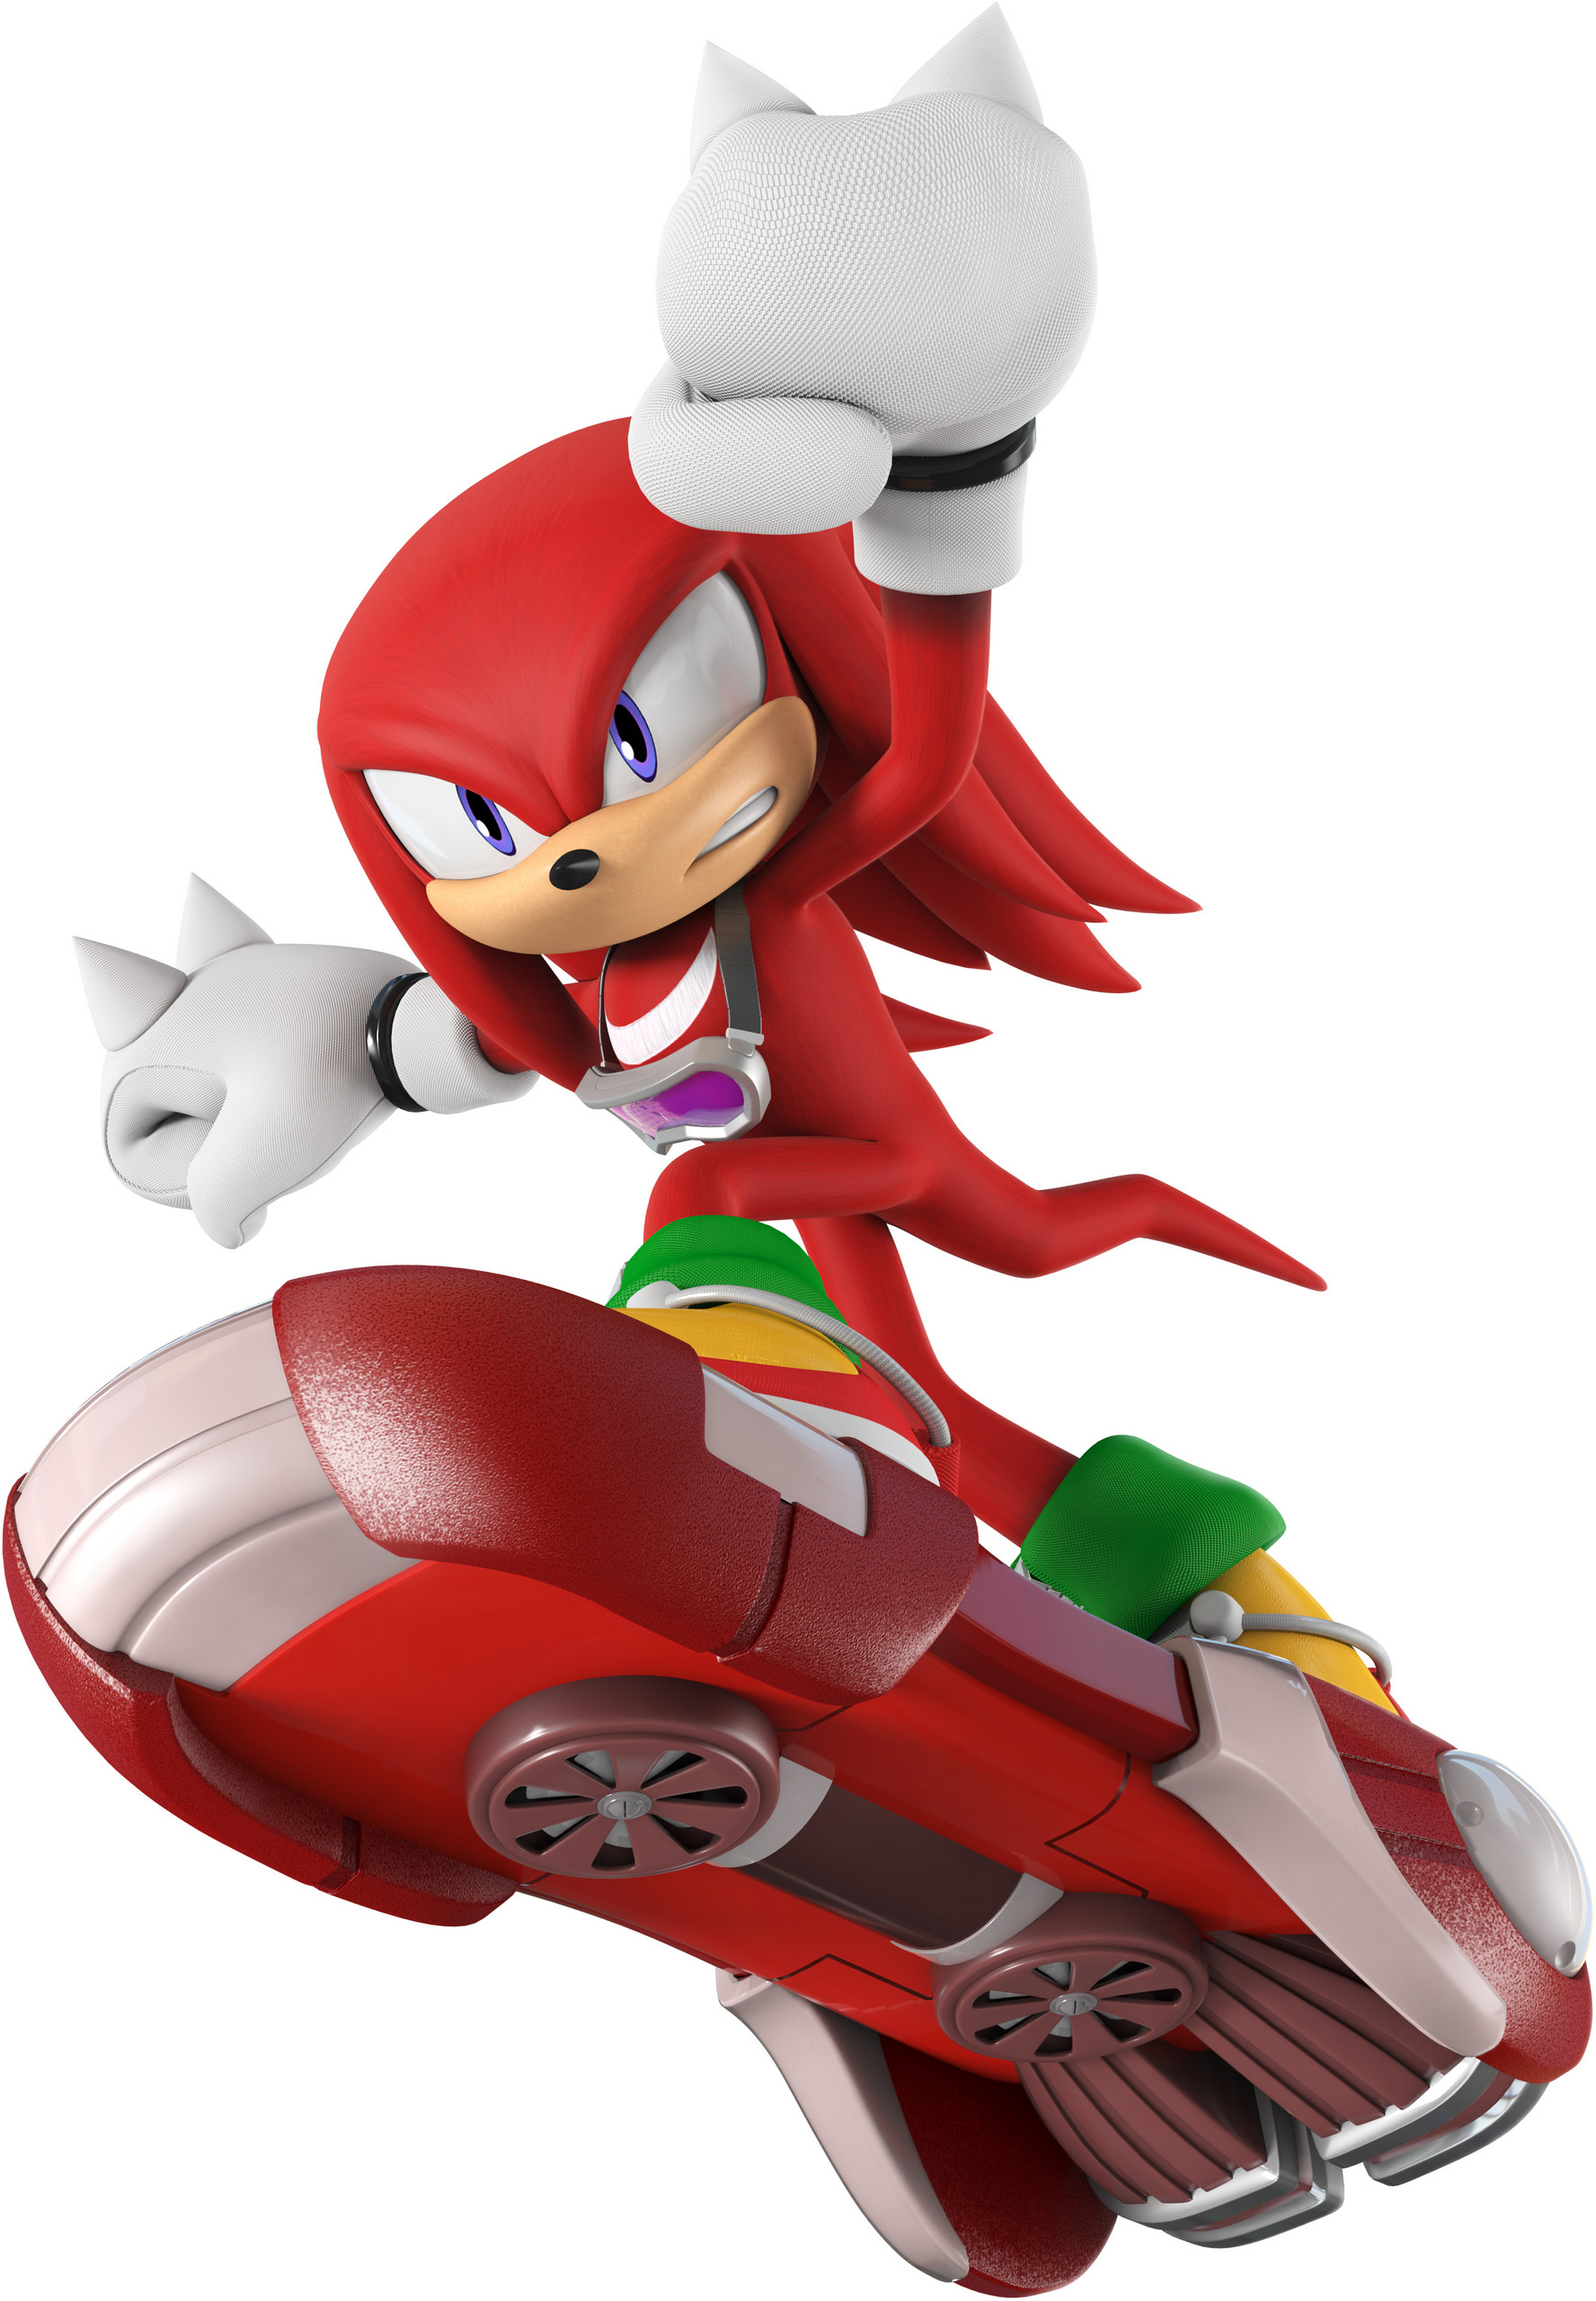 1776x2560 View Fullsize Knuckles the Echidna Image